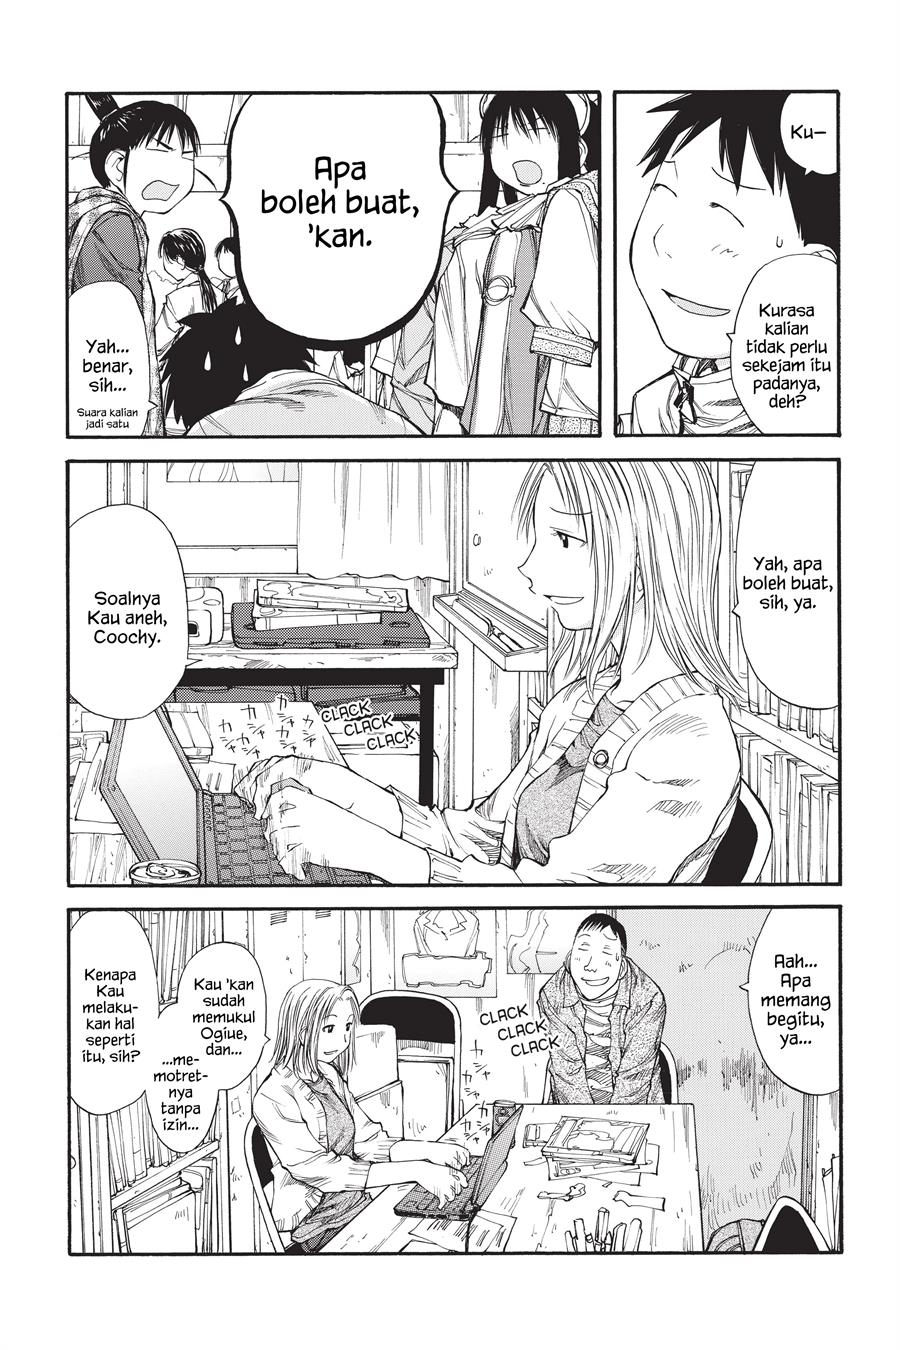 Genshiken – The Society for the Study of Modern Visual Culture Chapter 37